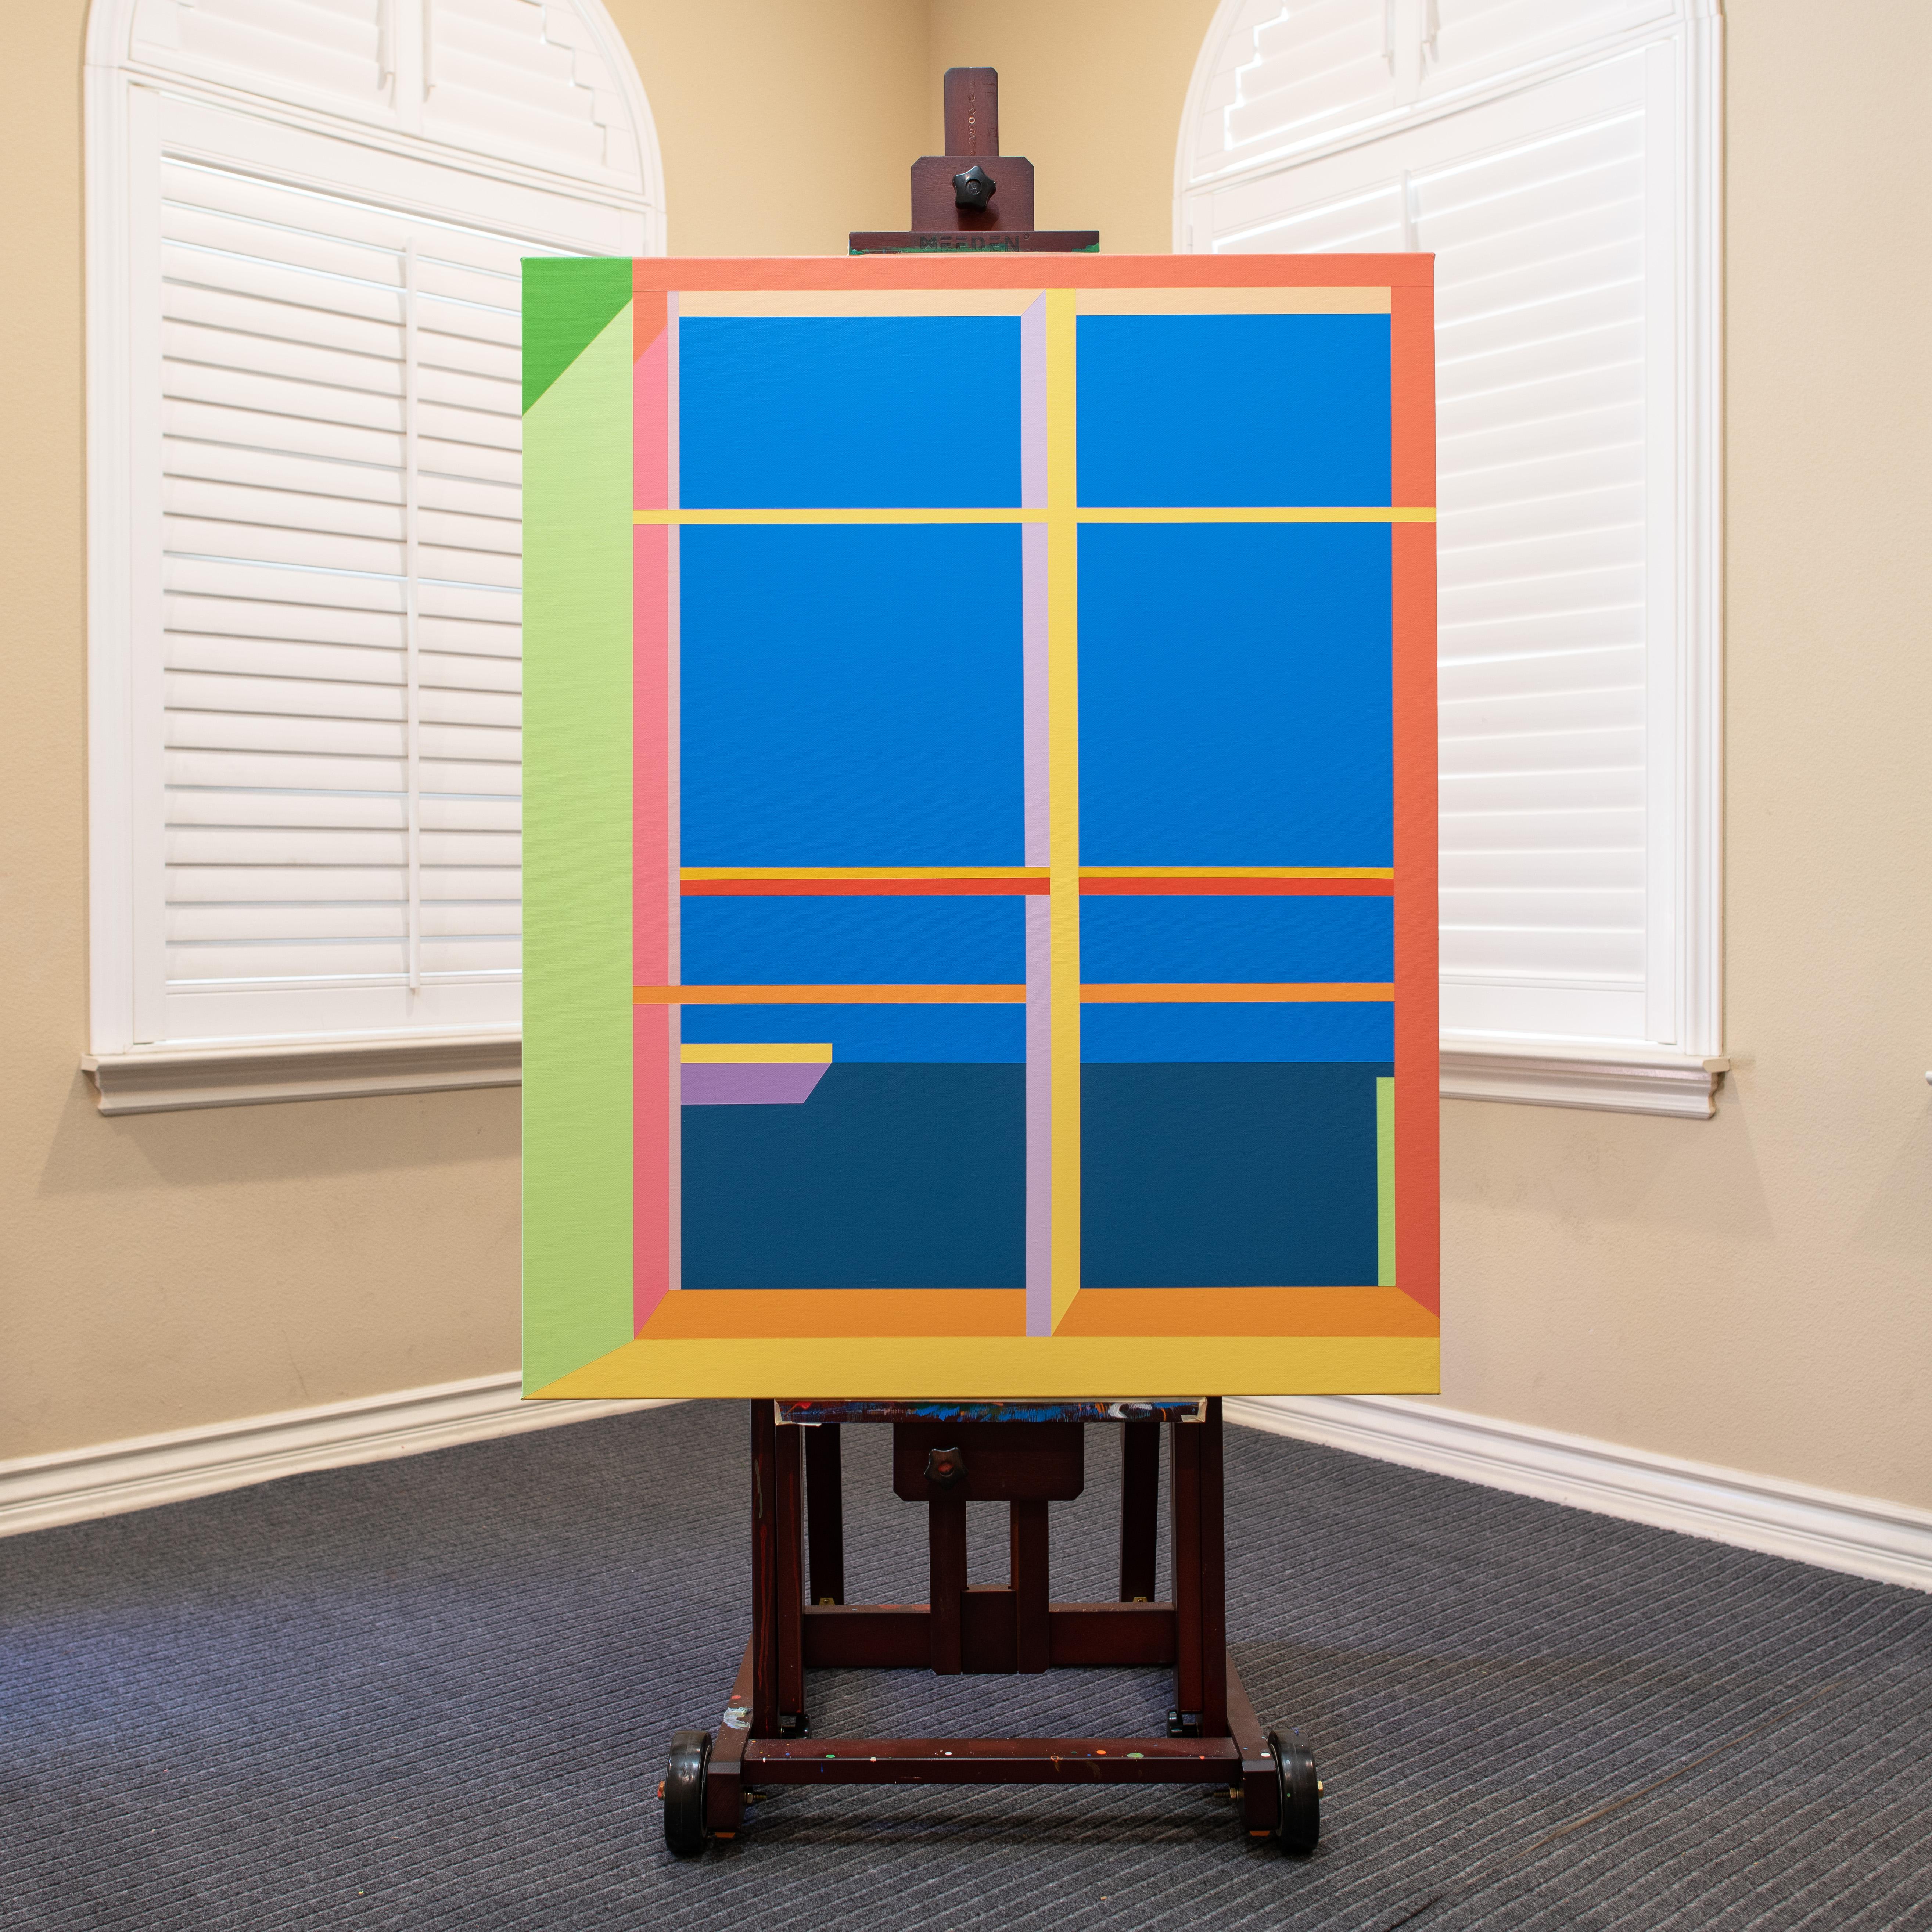 <p>Artist Comments<br>Modern and minimal styles gracefully work together in artist Wenjie Jin's fascinating display. She pictures an inviting window in solid shades of blue, pink, yellow, and green. 